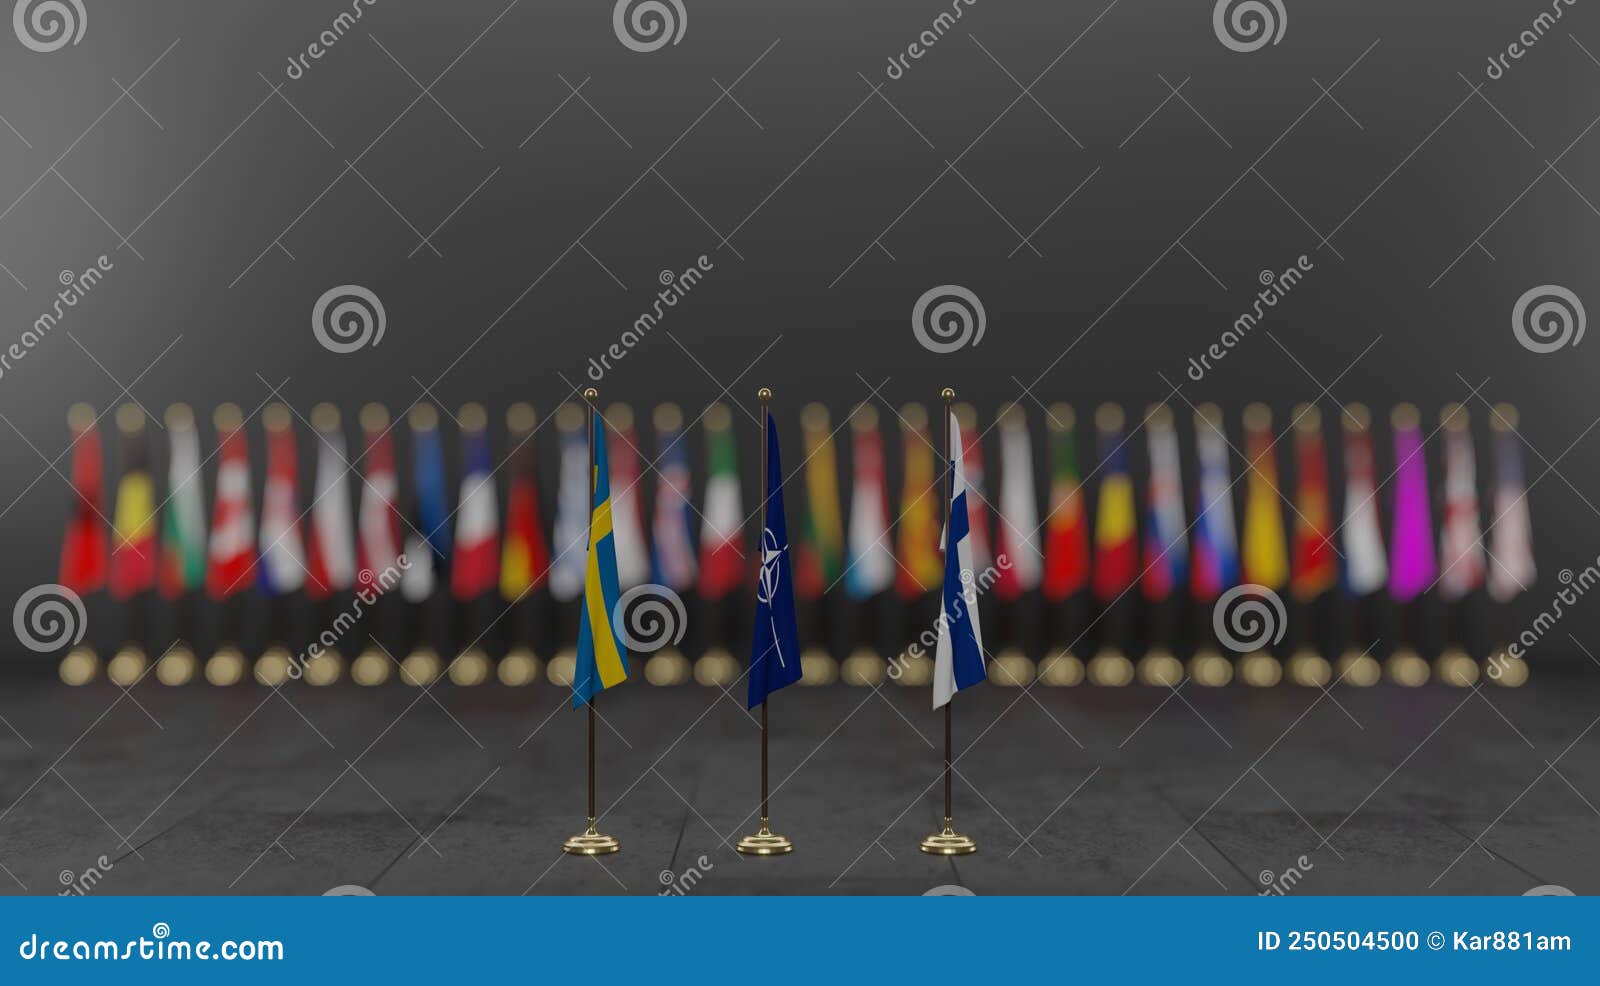 nato member countries flags, flags of nato members, nato summit, with finlandia sweden, finlandia sweden in nato, 3d work and 3d